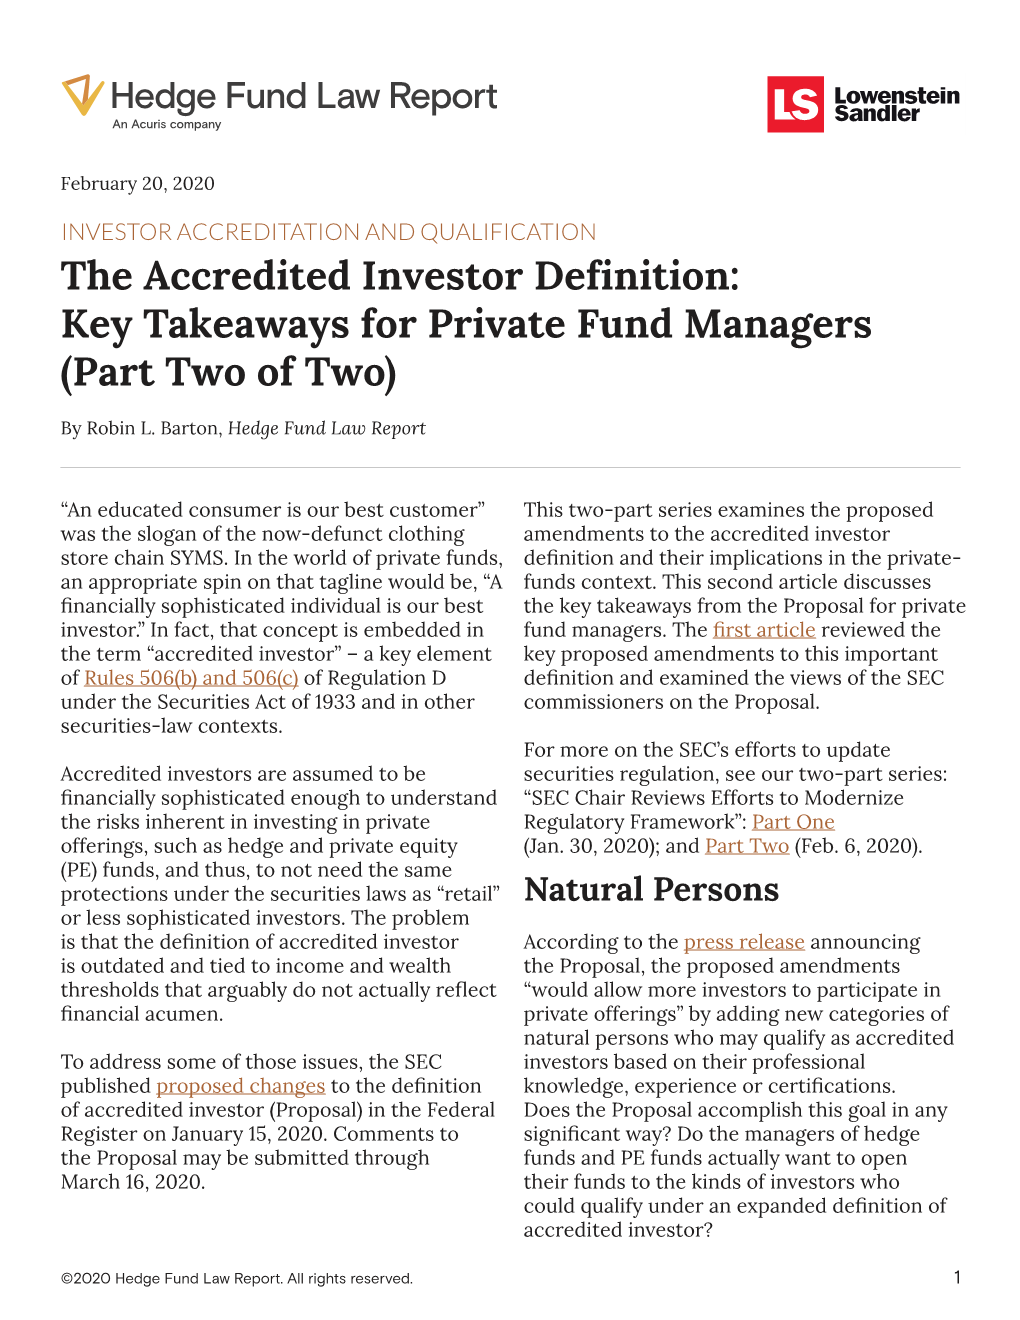 The Accredited Investor Definition: Key Takeaways for Private Fund Managers (Part Two of Two)